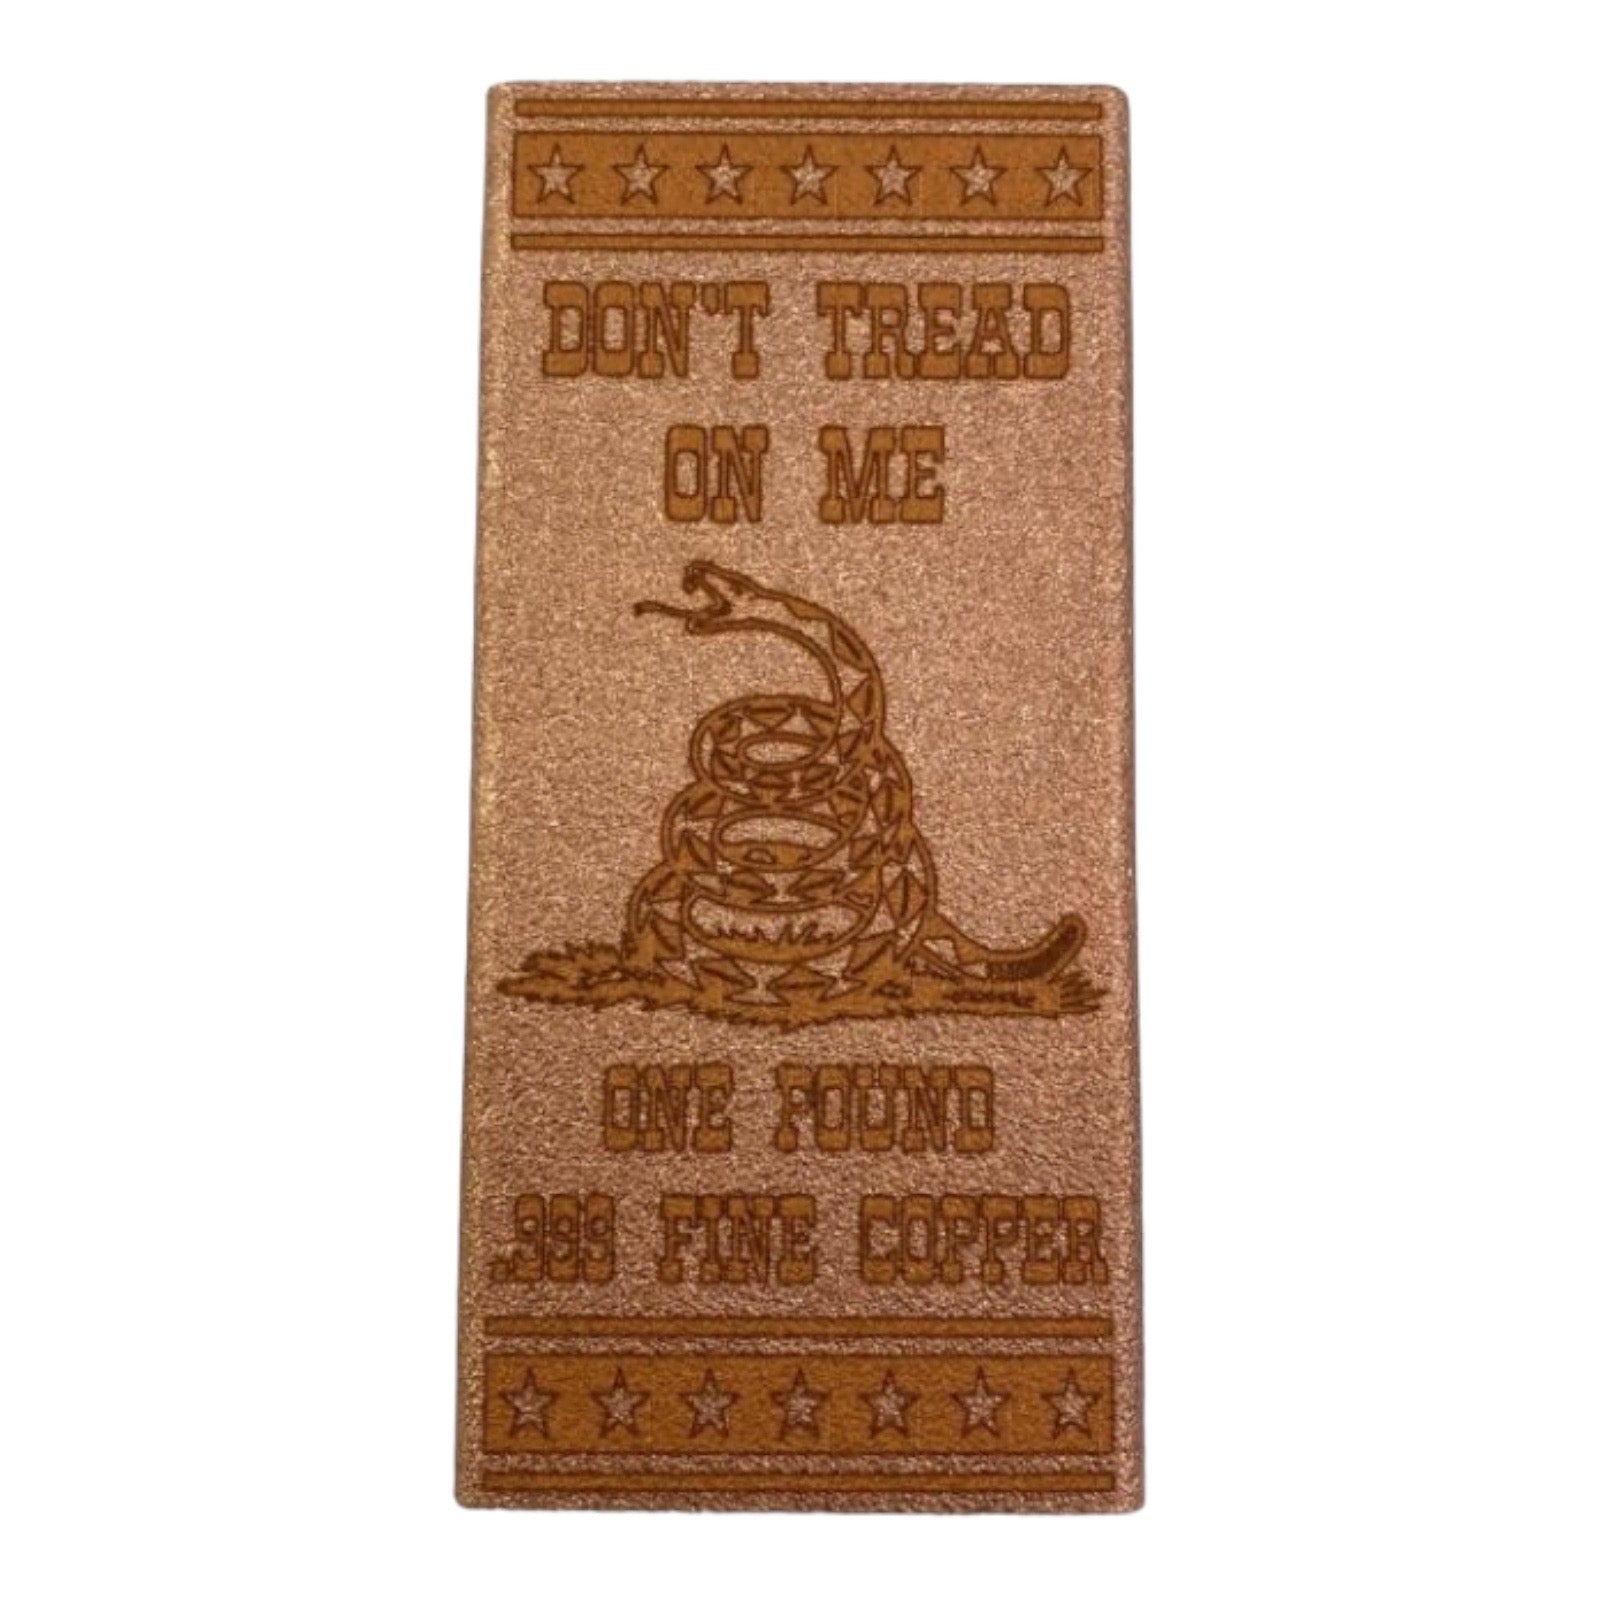 Don't Tread on Me one pound copper bullion bar by Liberty Copper